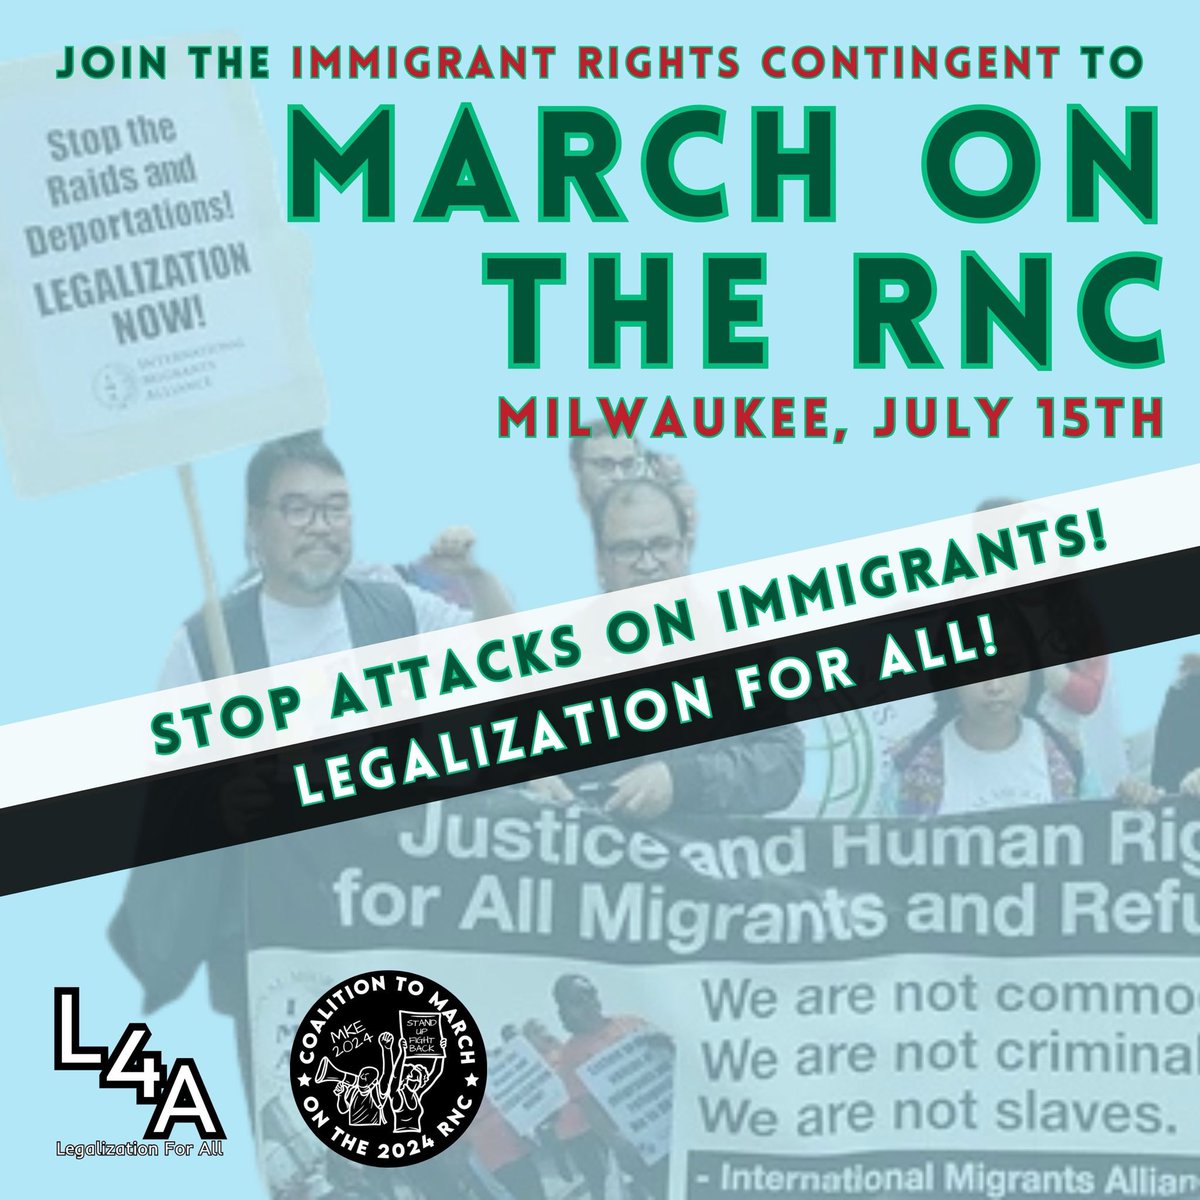 July 15th we will be joining the Coalition to March on the Republican National Convention, in an immigrant rights contingent. Will you join us? #MarchOnTheRNC time to demand #LegalizationForAll 🔥✊🏽